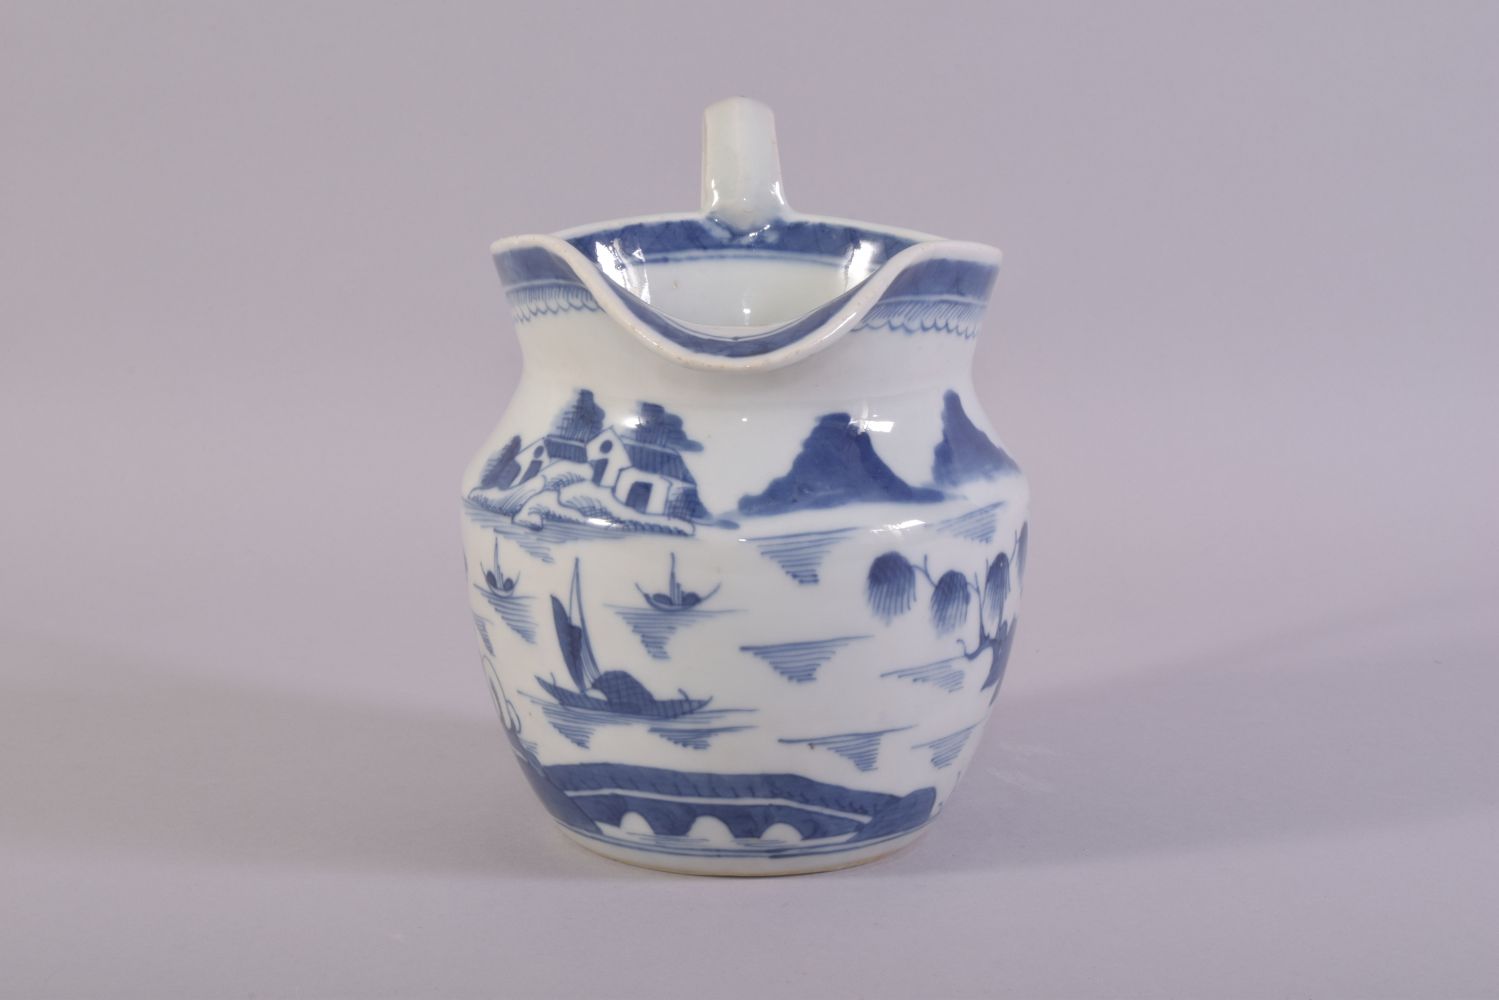 A CHINESE BLUE AND WHITE PORCELAIN JUG, decorated with a landscape scene depicting buildings, - Image 2 of 6